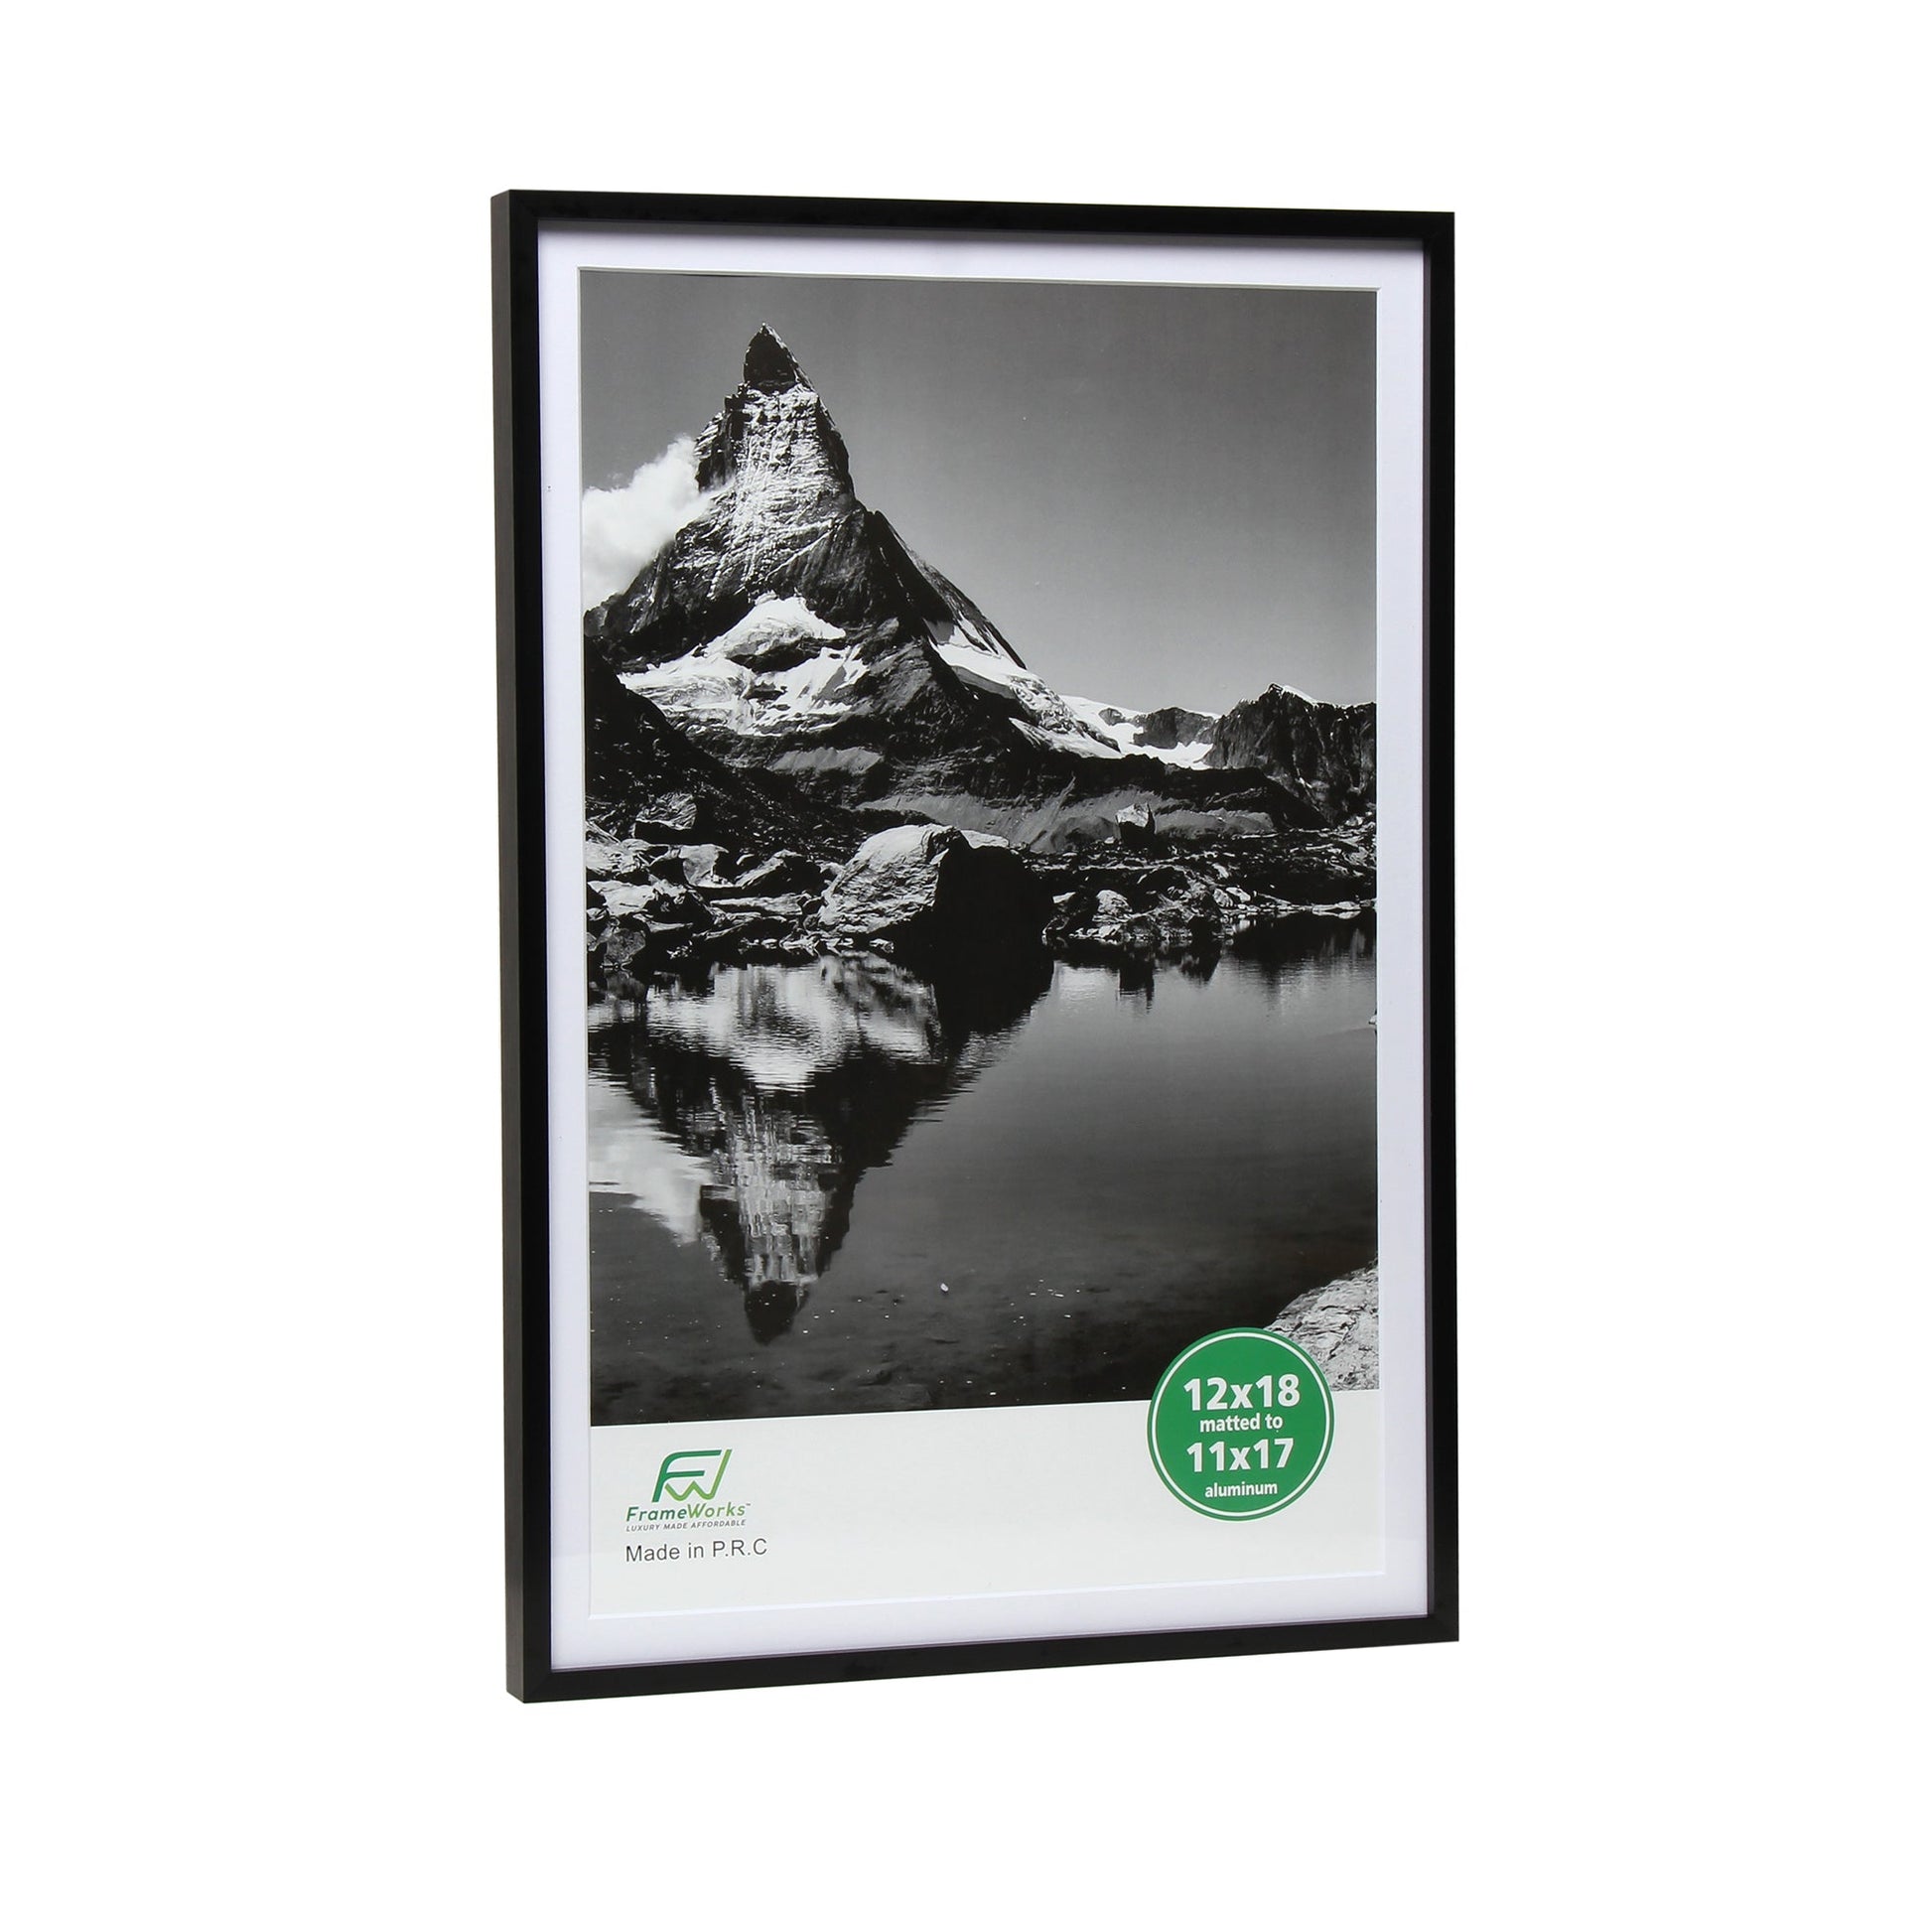 12" x 18" Deluxe Black Aluminum Contemporary Picture Frame, 11" x 17" Matted